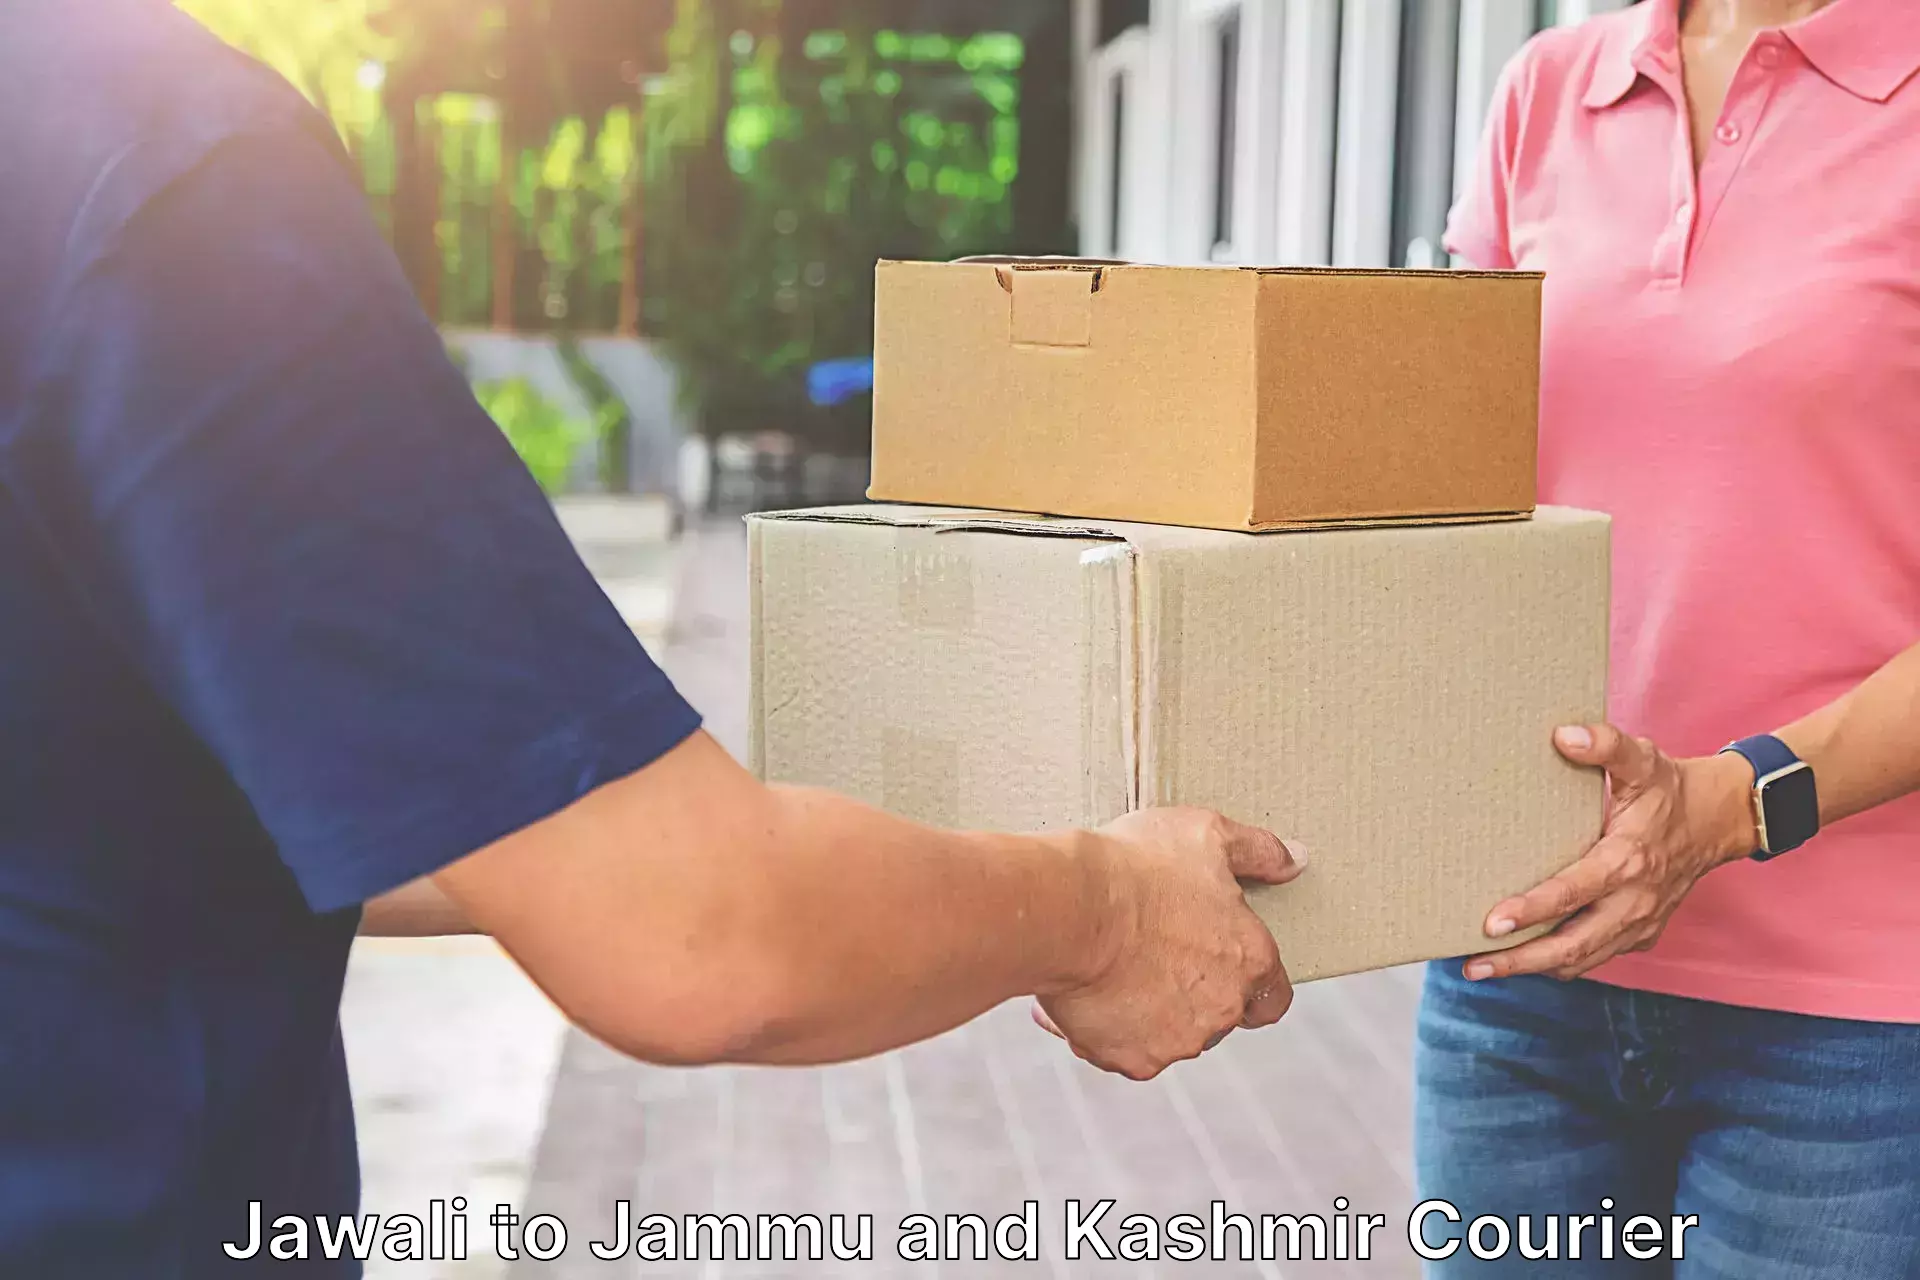 State-of-the-art courier technology Jawali to Jammu